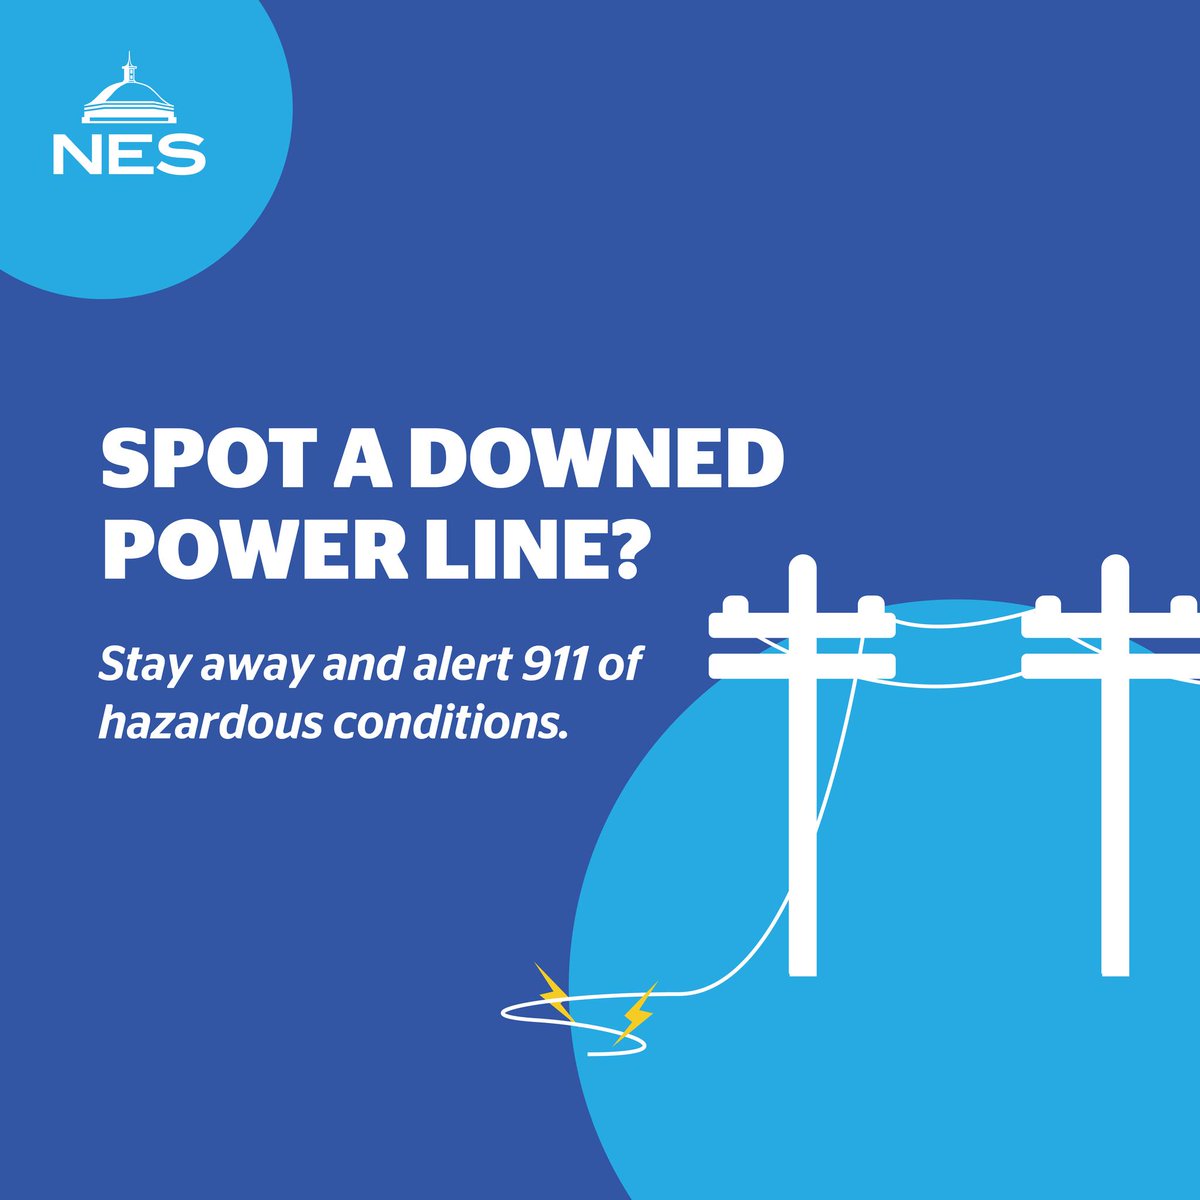 Heavy winds can easily knock tree limbs and other vegetation into power lines, dropping them to the ground or other surfaces. If you come across a downed power line, always assume it is live and keep everyone away from the area, including pets! Call 9-1-1 to report the damaged